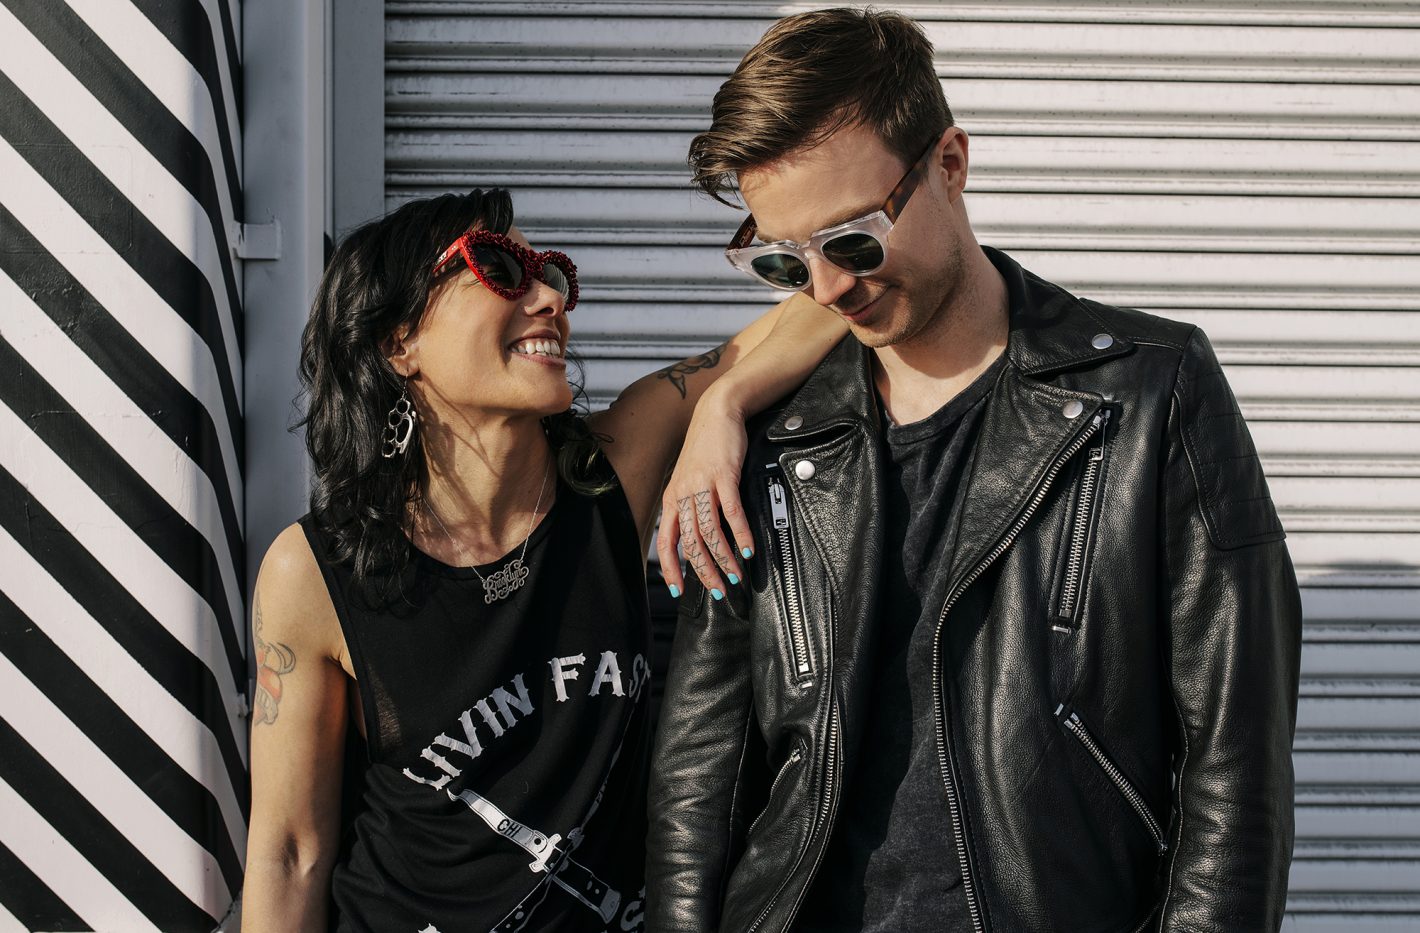 Where Do We Go From Here? • Matt and Kim Return for Triumphant Sixth LP